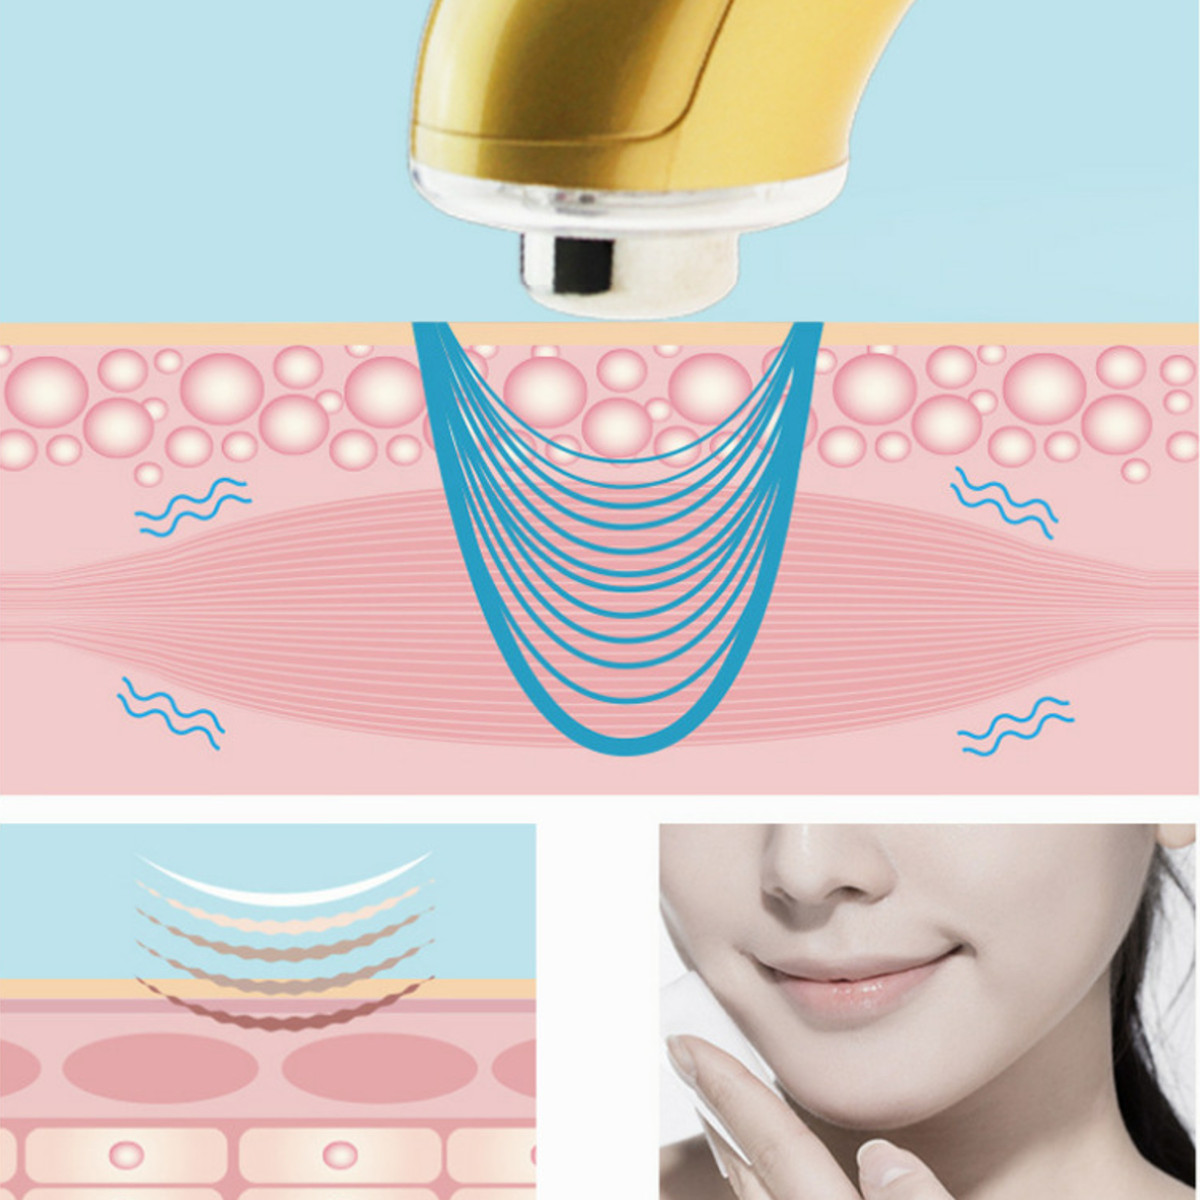 5-in-1-Ultrasound-Photon-Ionic-Device-3-LED-Light-3Mhz-Face-Lift-Skin-Beauty-SPZ-Machine-1395411